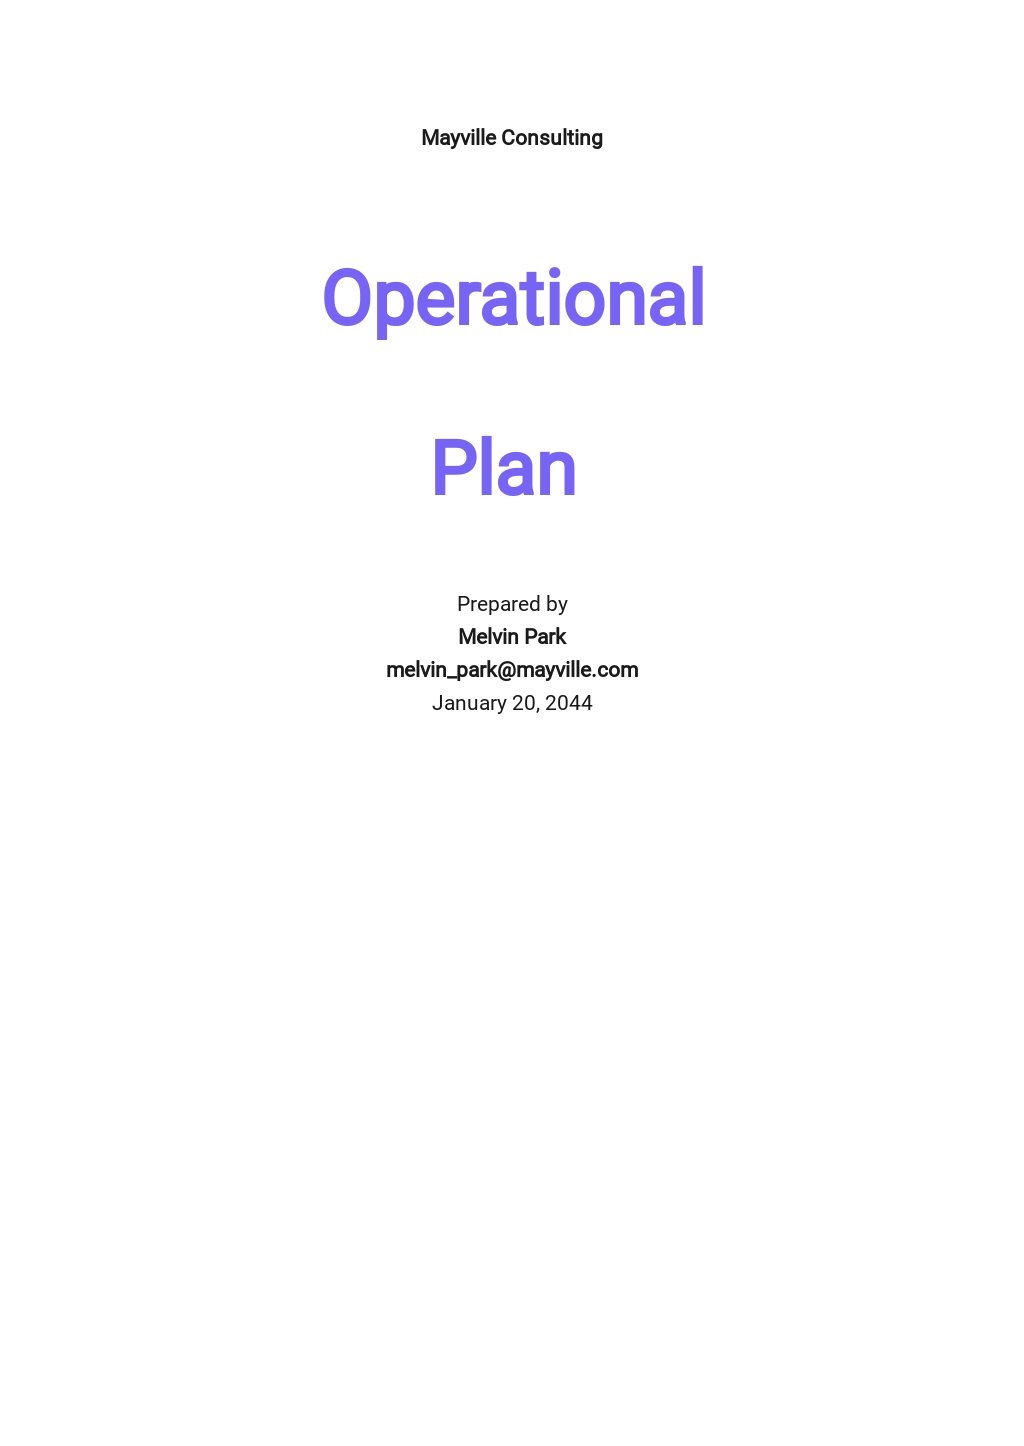 manage operational plan assignment